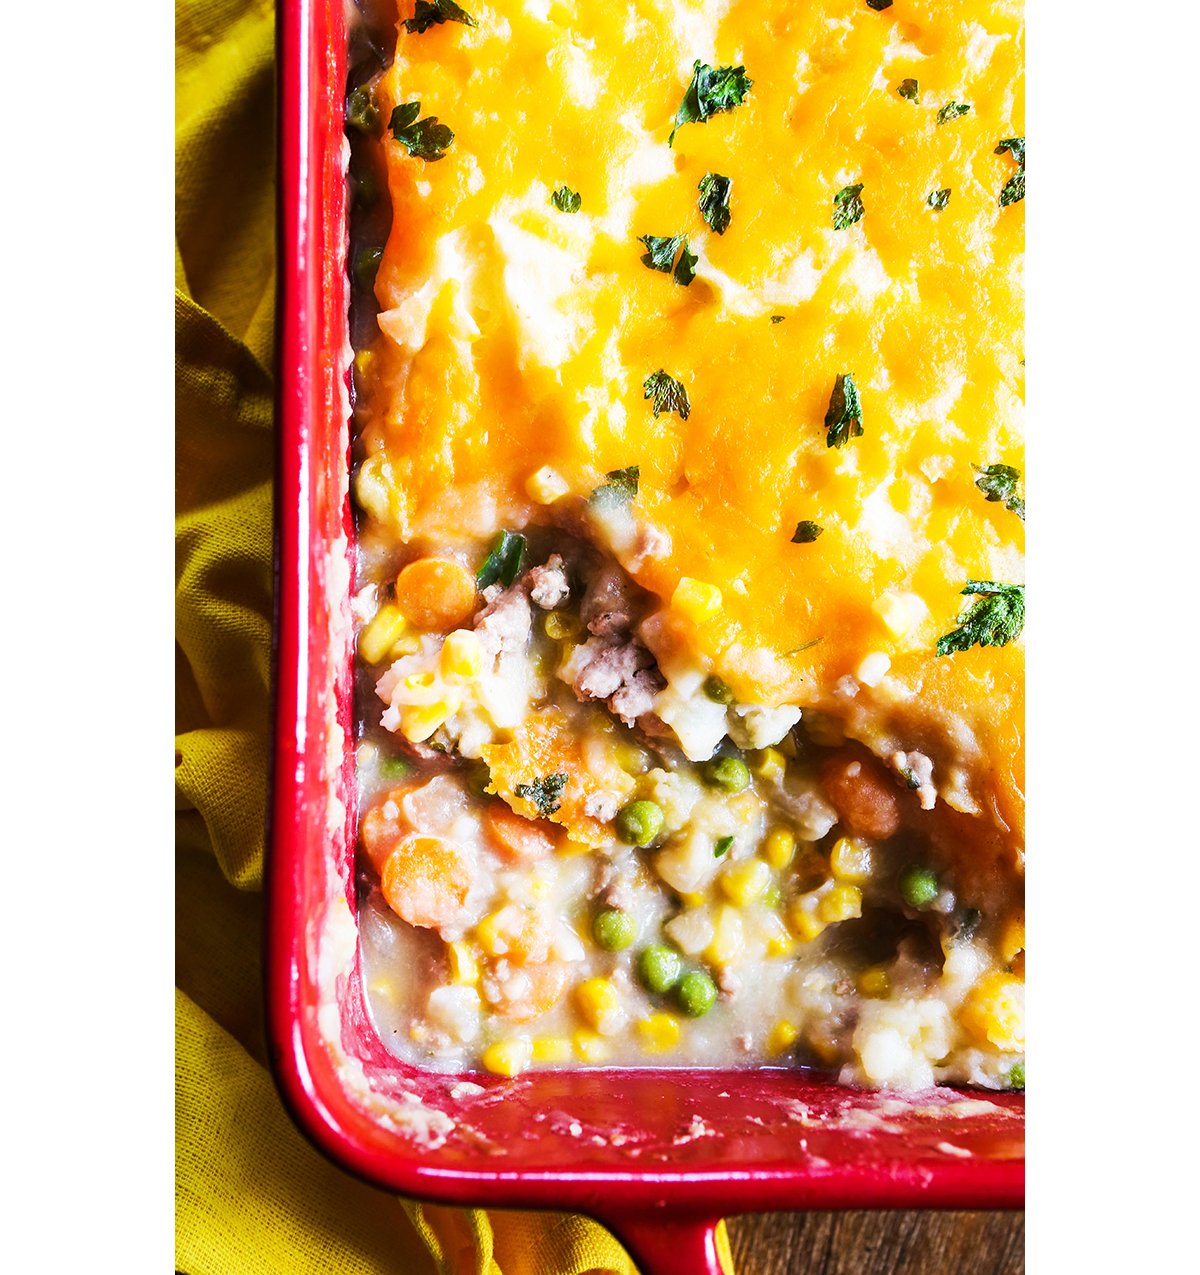 Top view of a casserole dish filled with cheese-topped shepherd's pie.